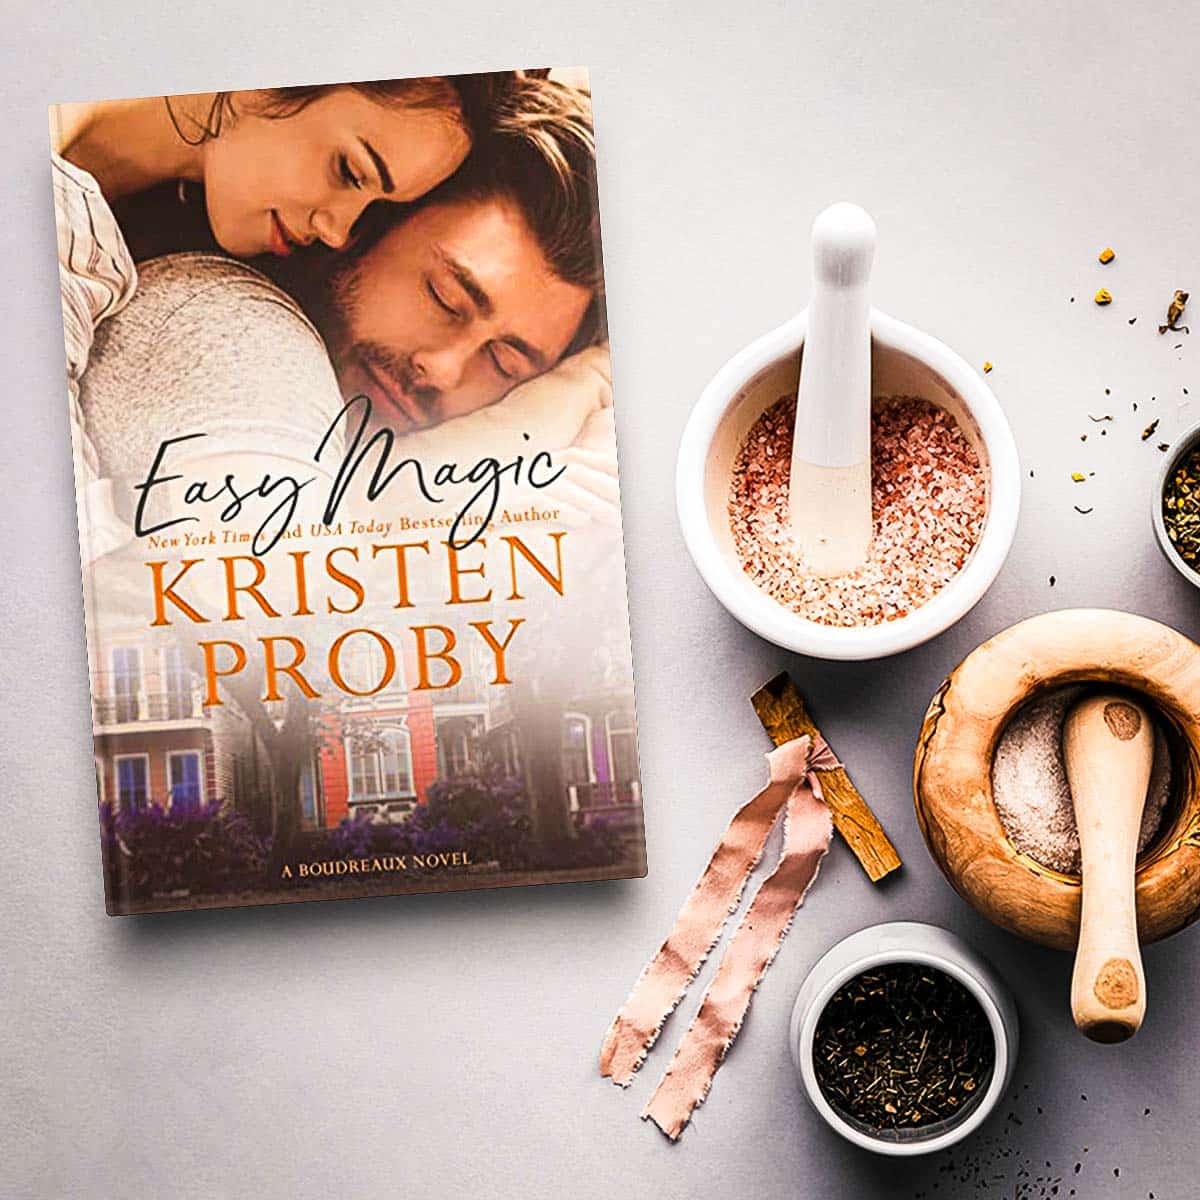 Easy Magic by Kristen Proby – Boudreaux Book 5